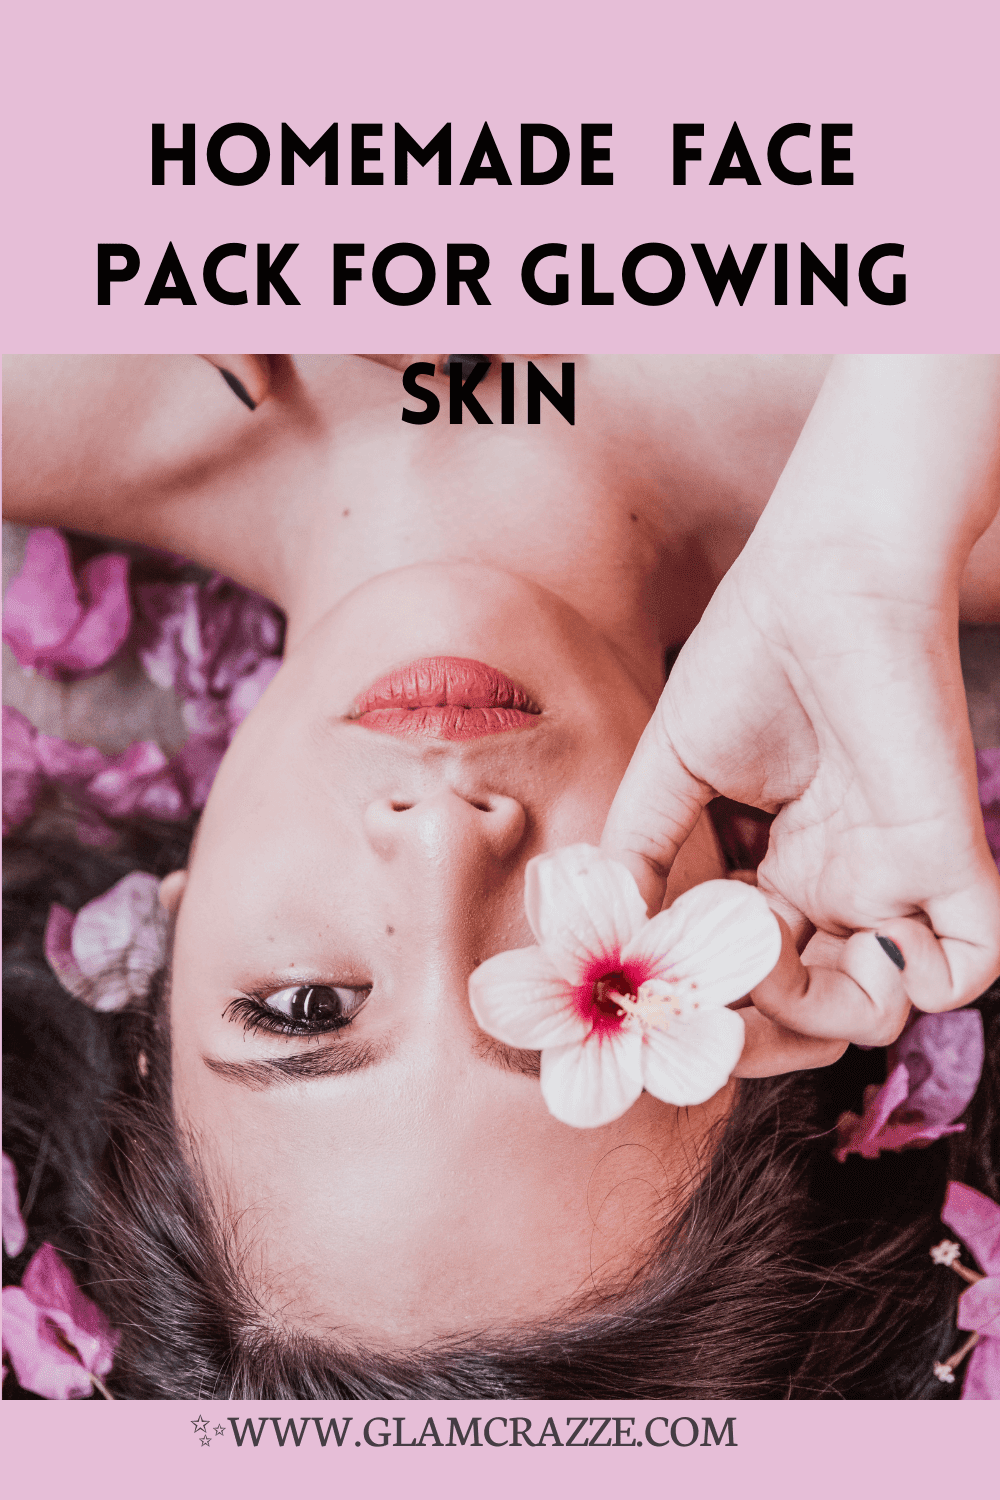 Homemade face pack for glowing skin